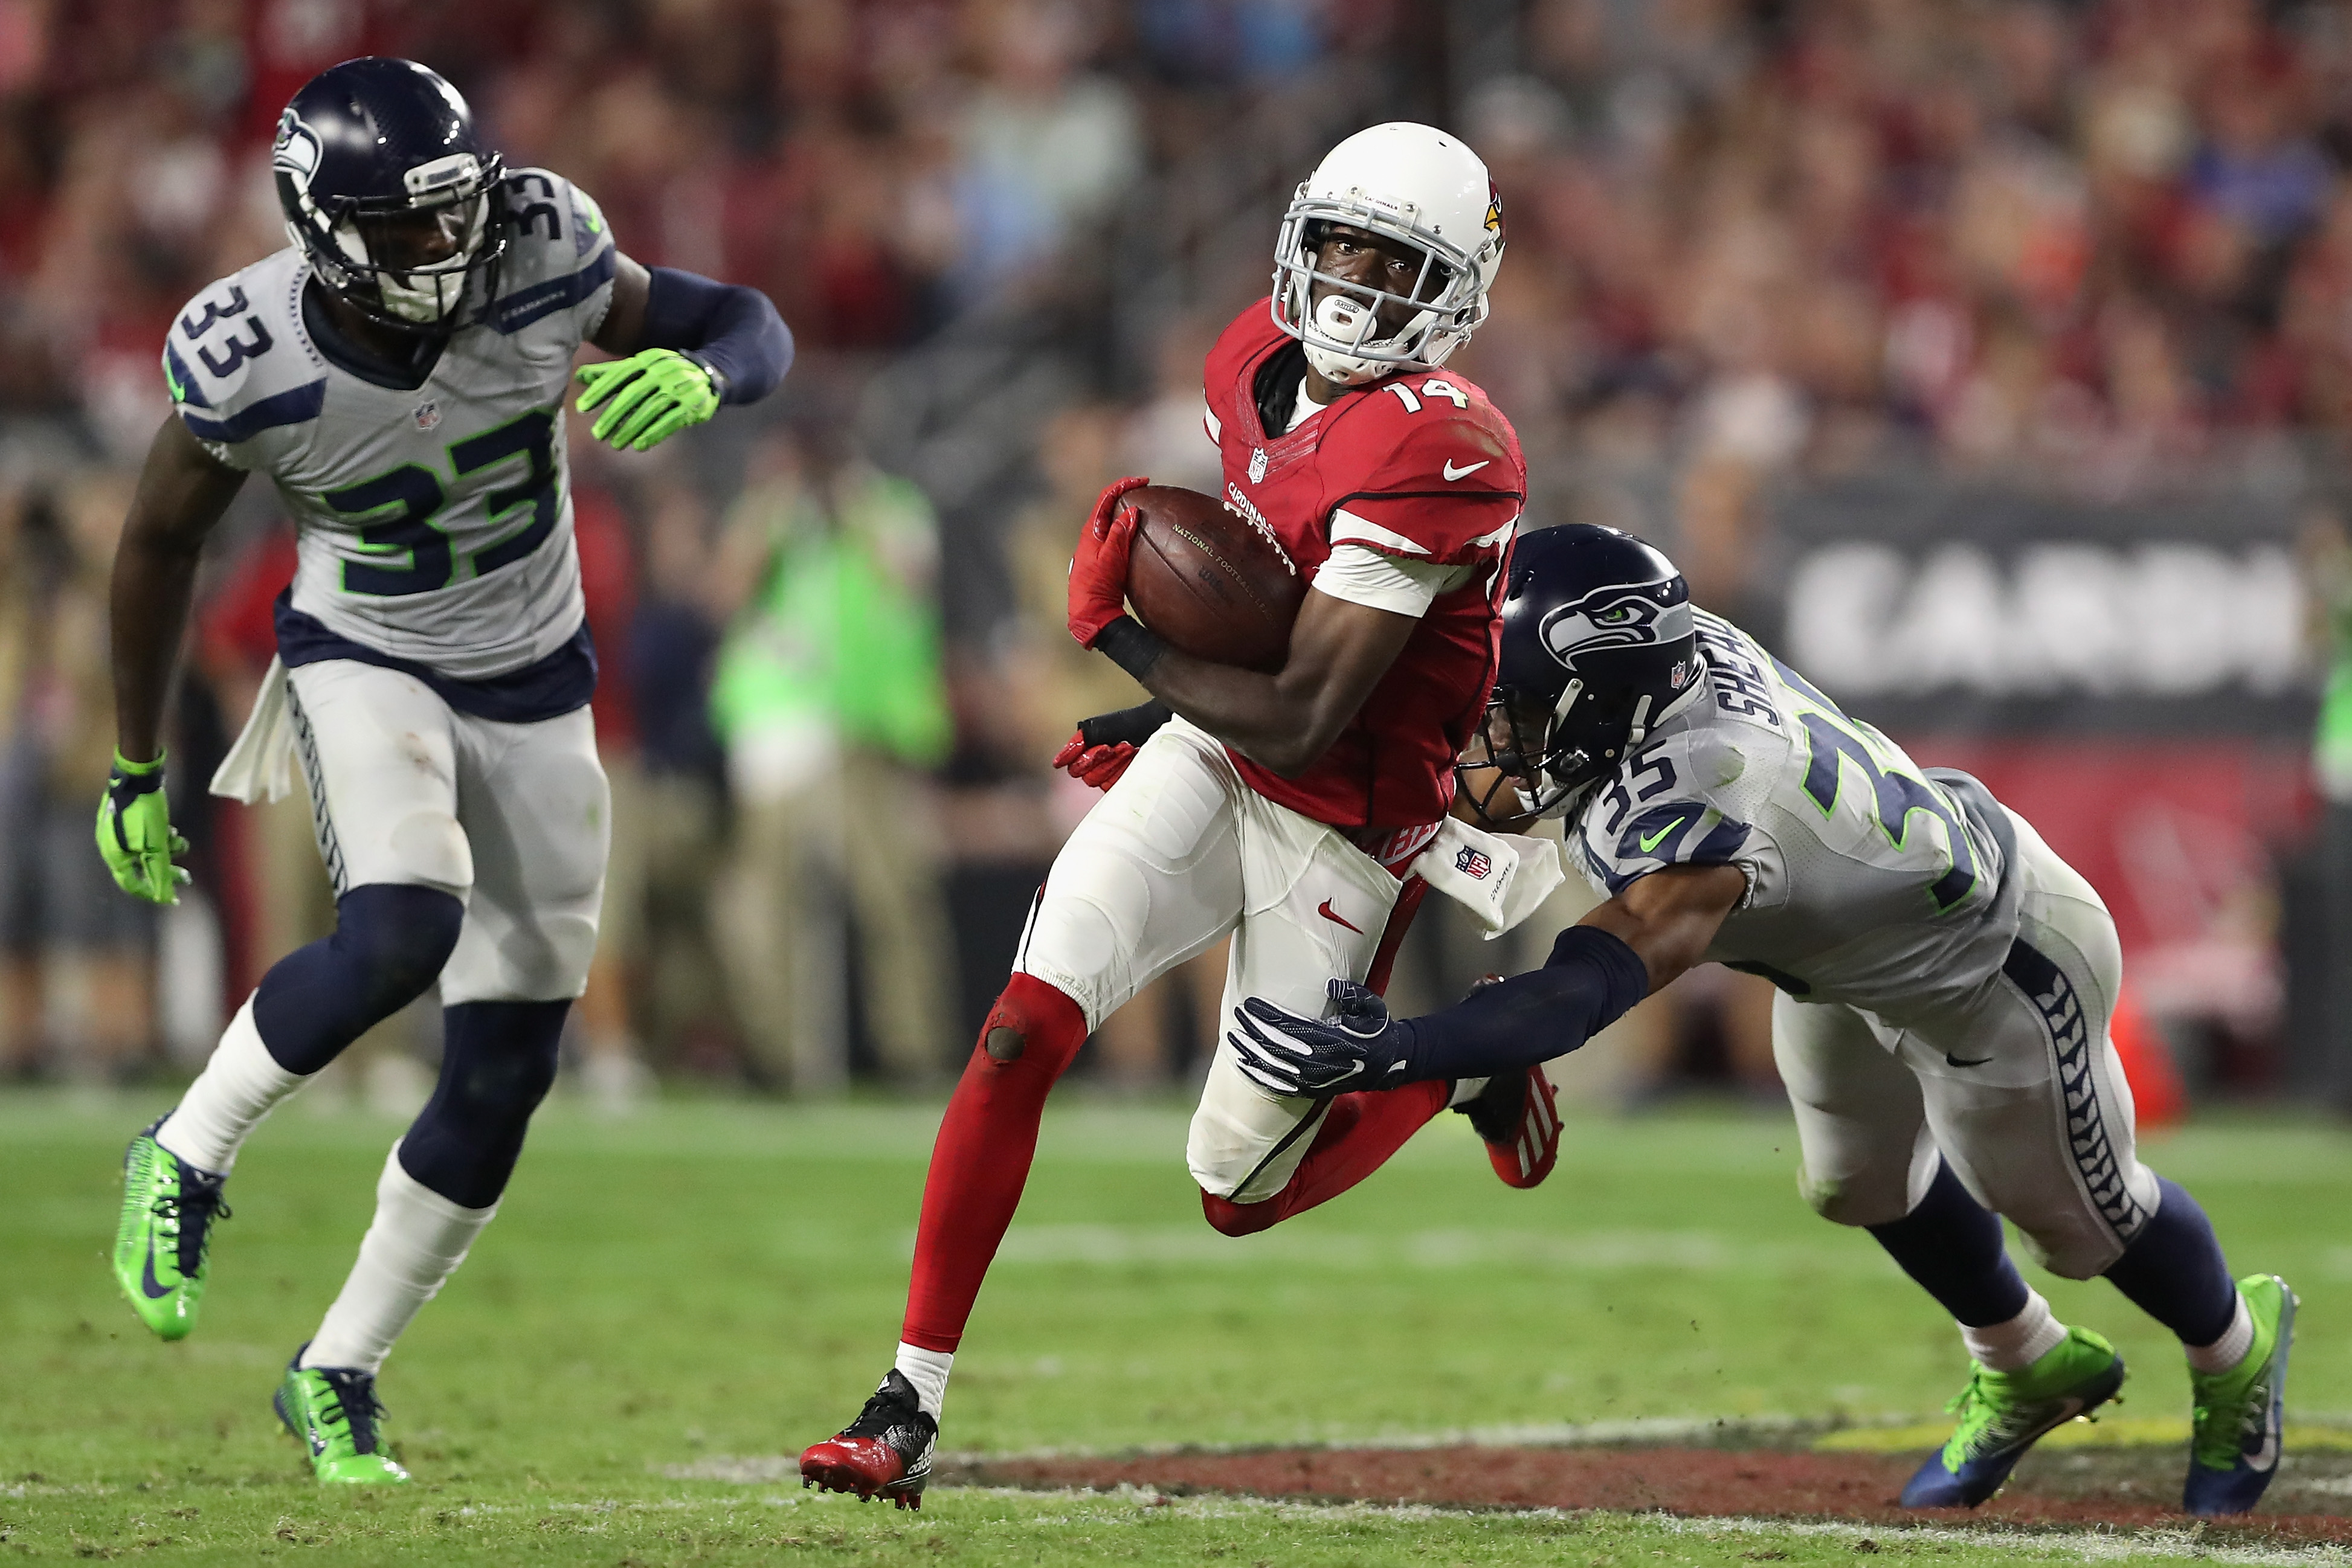 Wide receiver J.J. Nelson #14 of the Arizona Cardinals runs with the football after a reception past cornerback DeShawn Shead #35 of the Seattle Seahawks during the NFL game at the University of Phoenix Stadium on Oct. 23. (Christian Petersen—Getty Images)